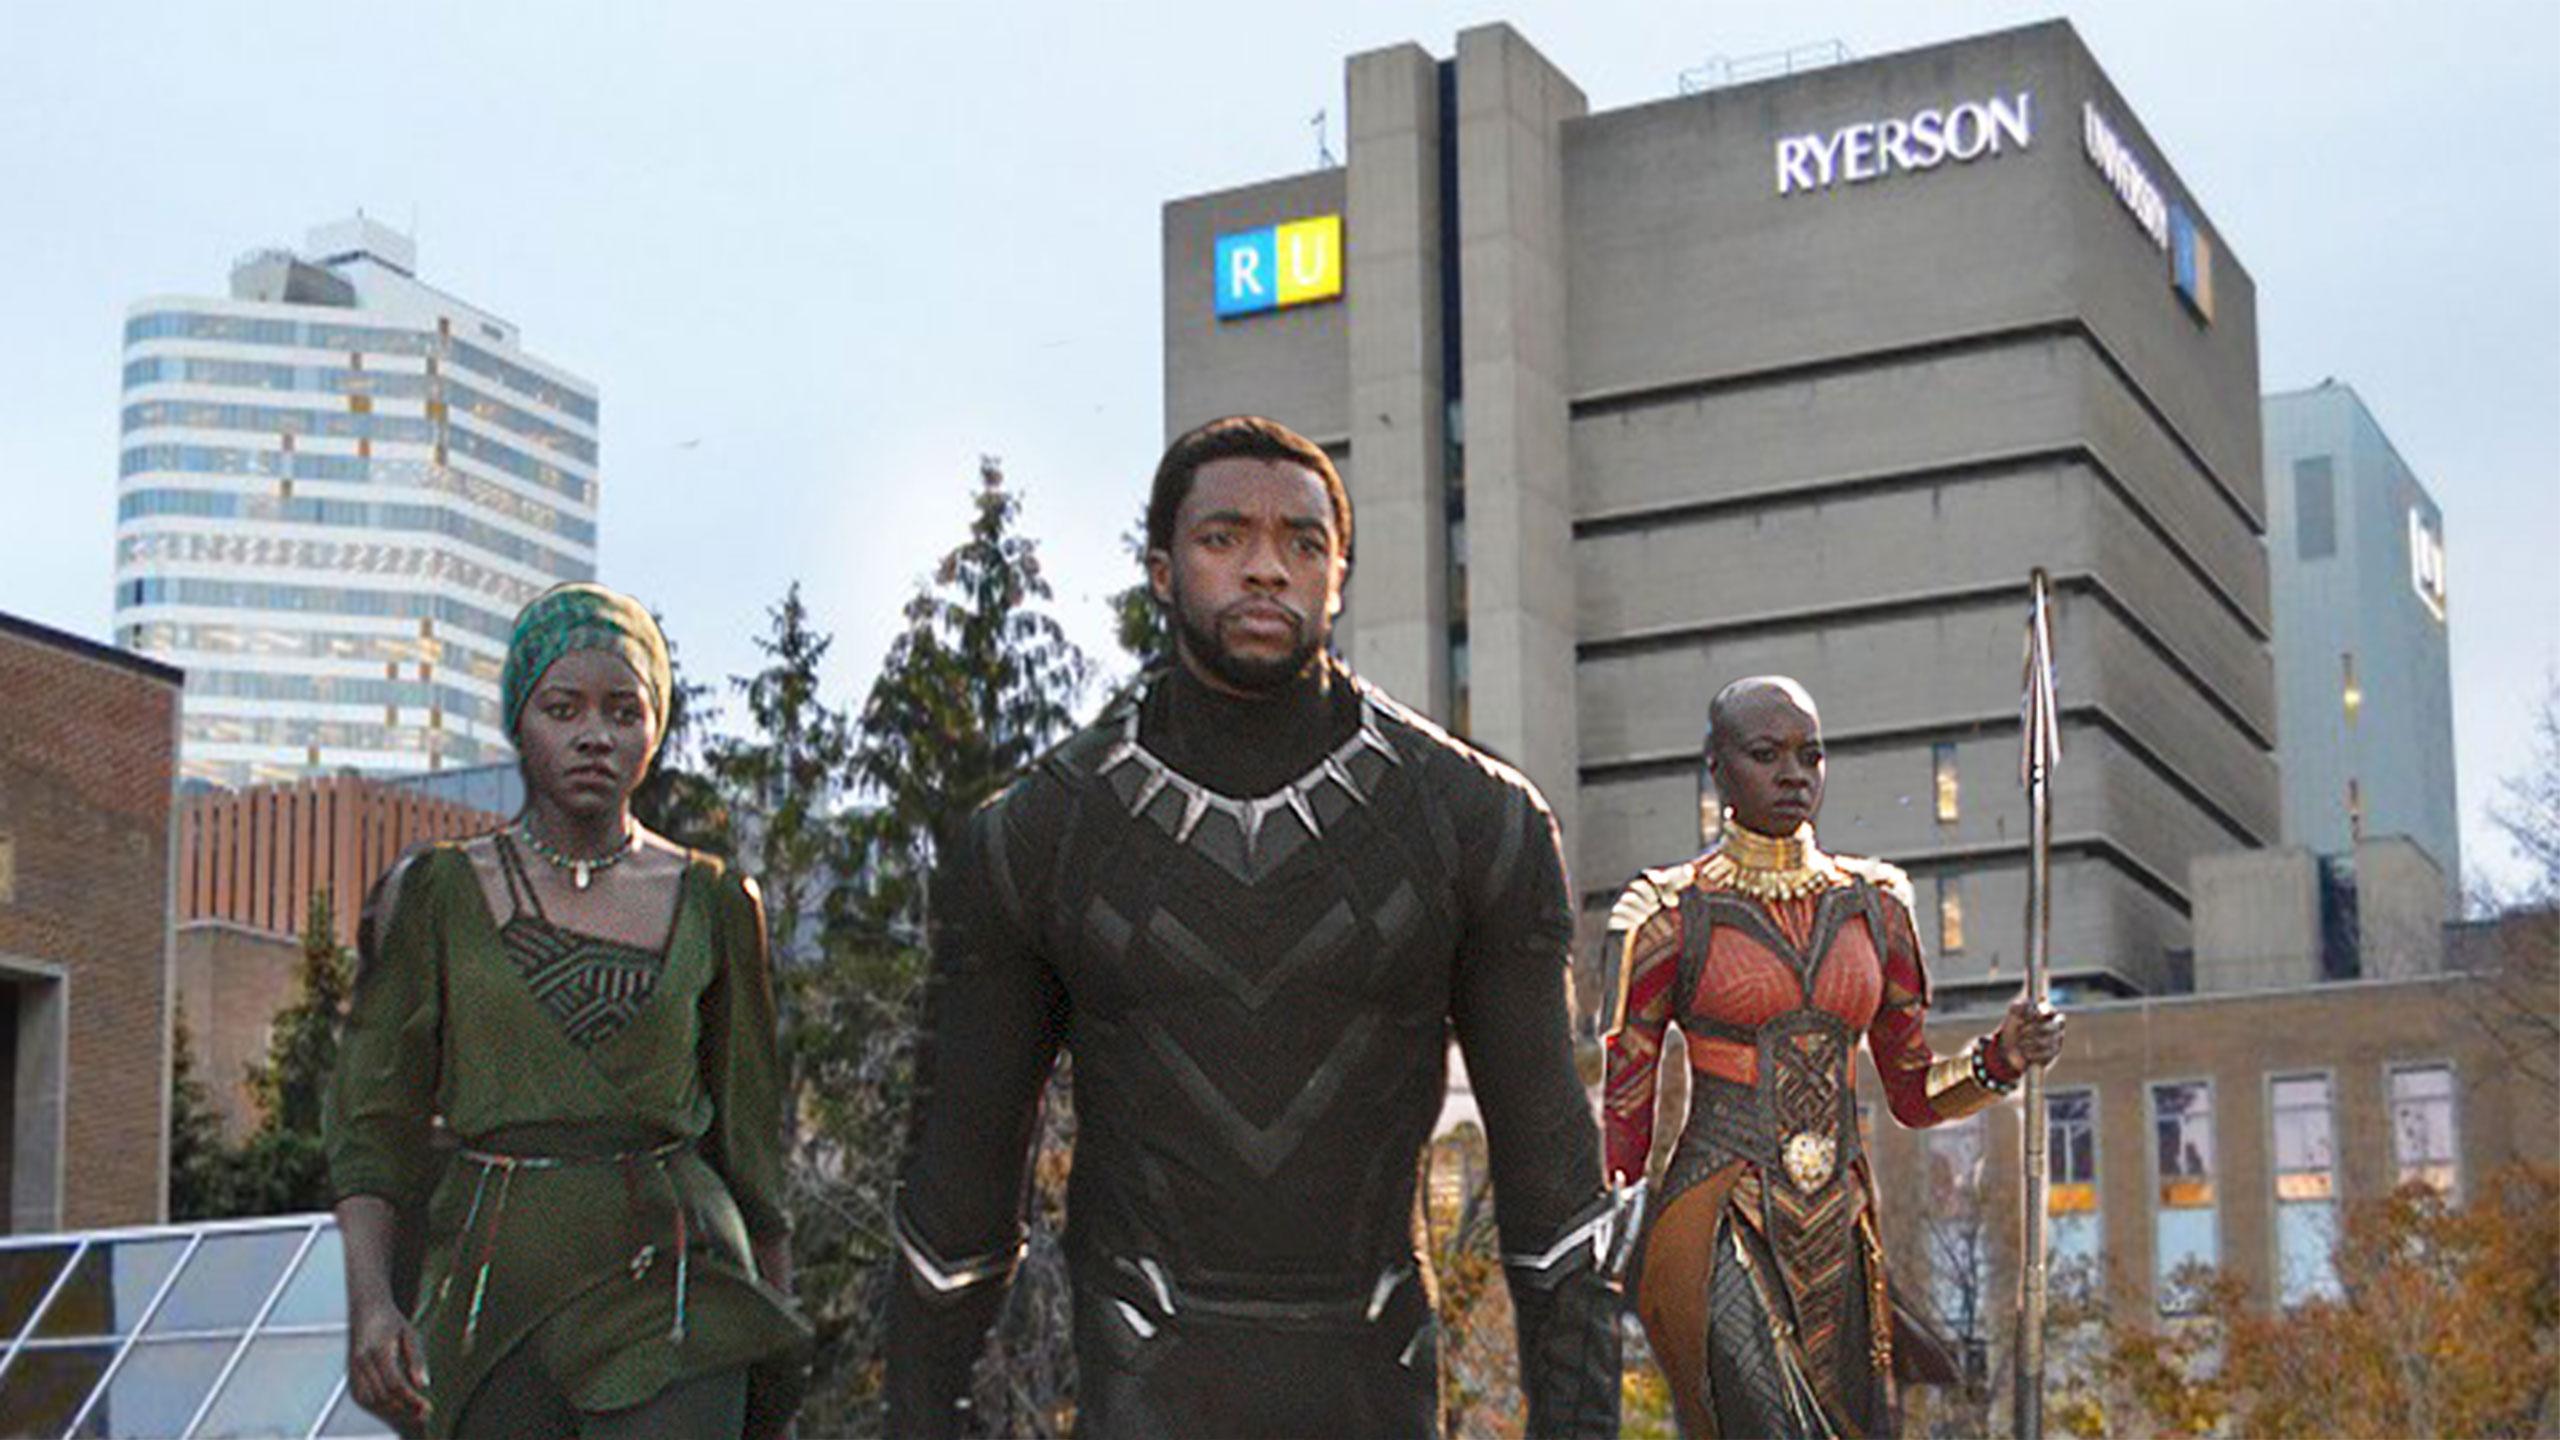 A photo illustration of Black Panther characters walking through Ryerson's campus.